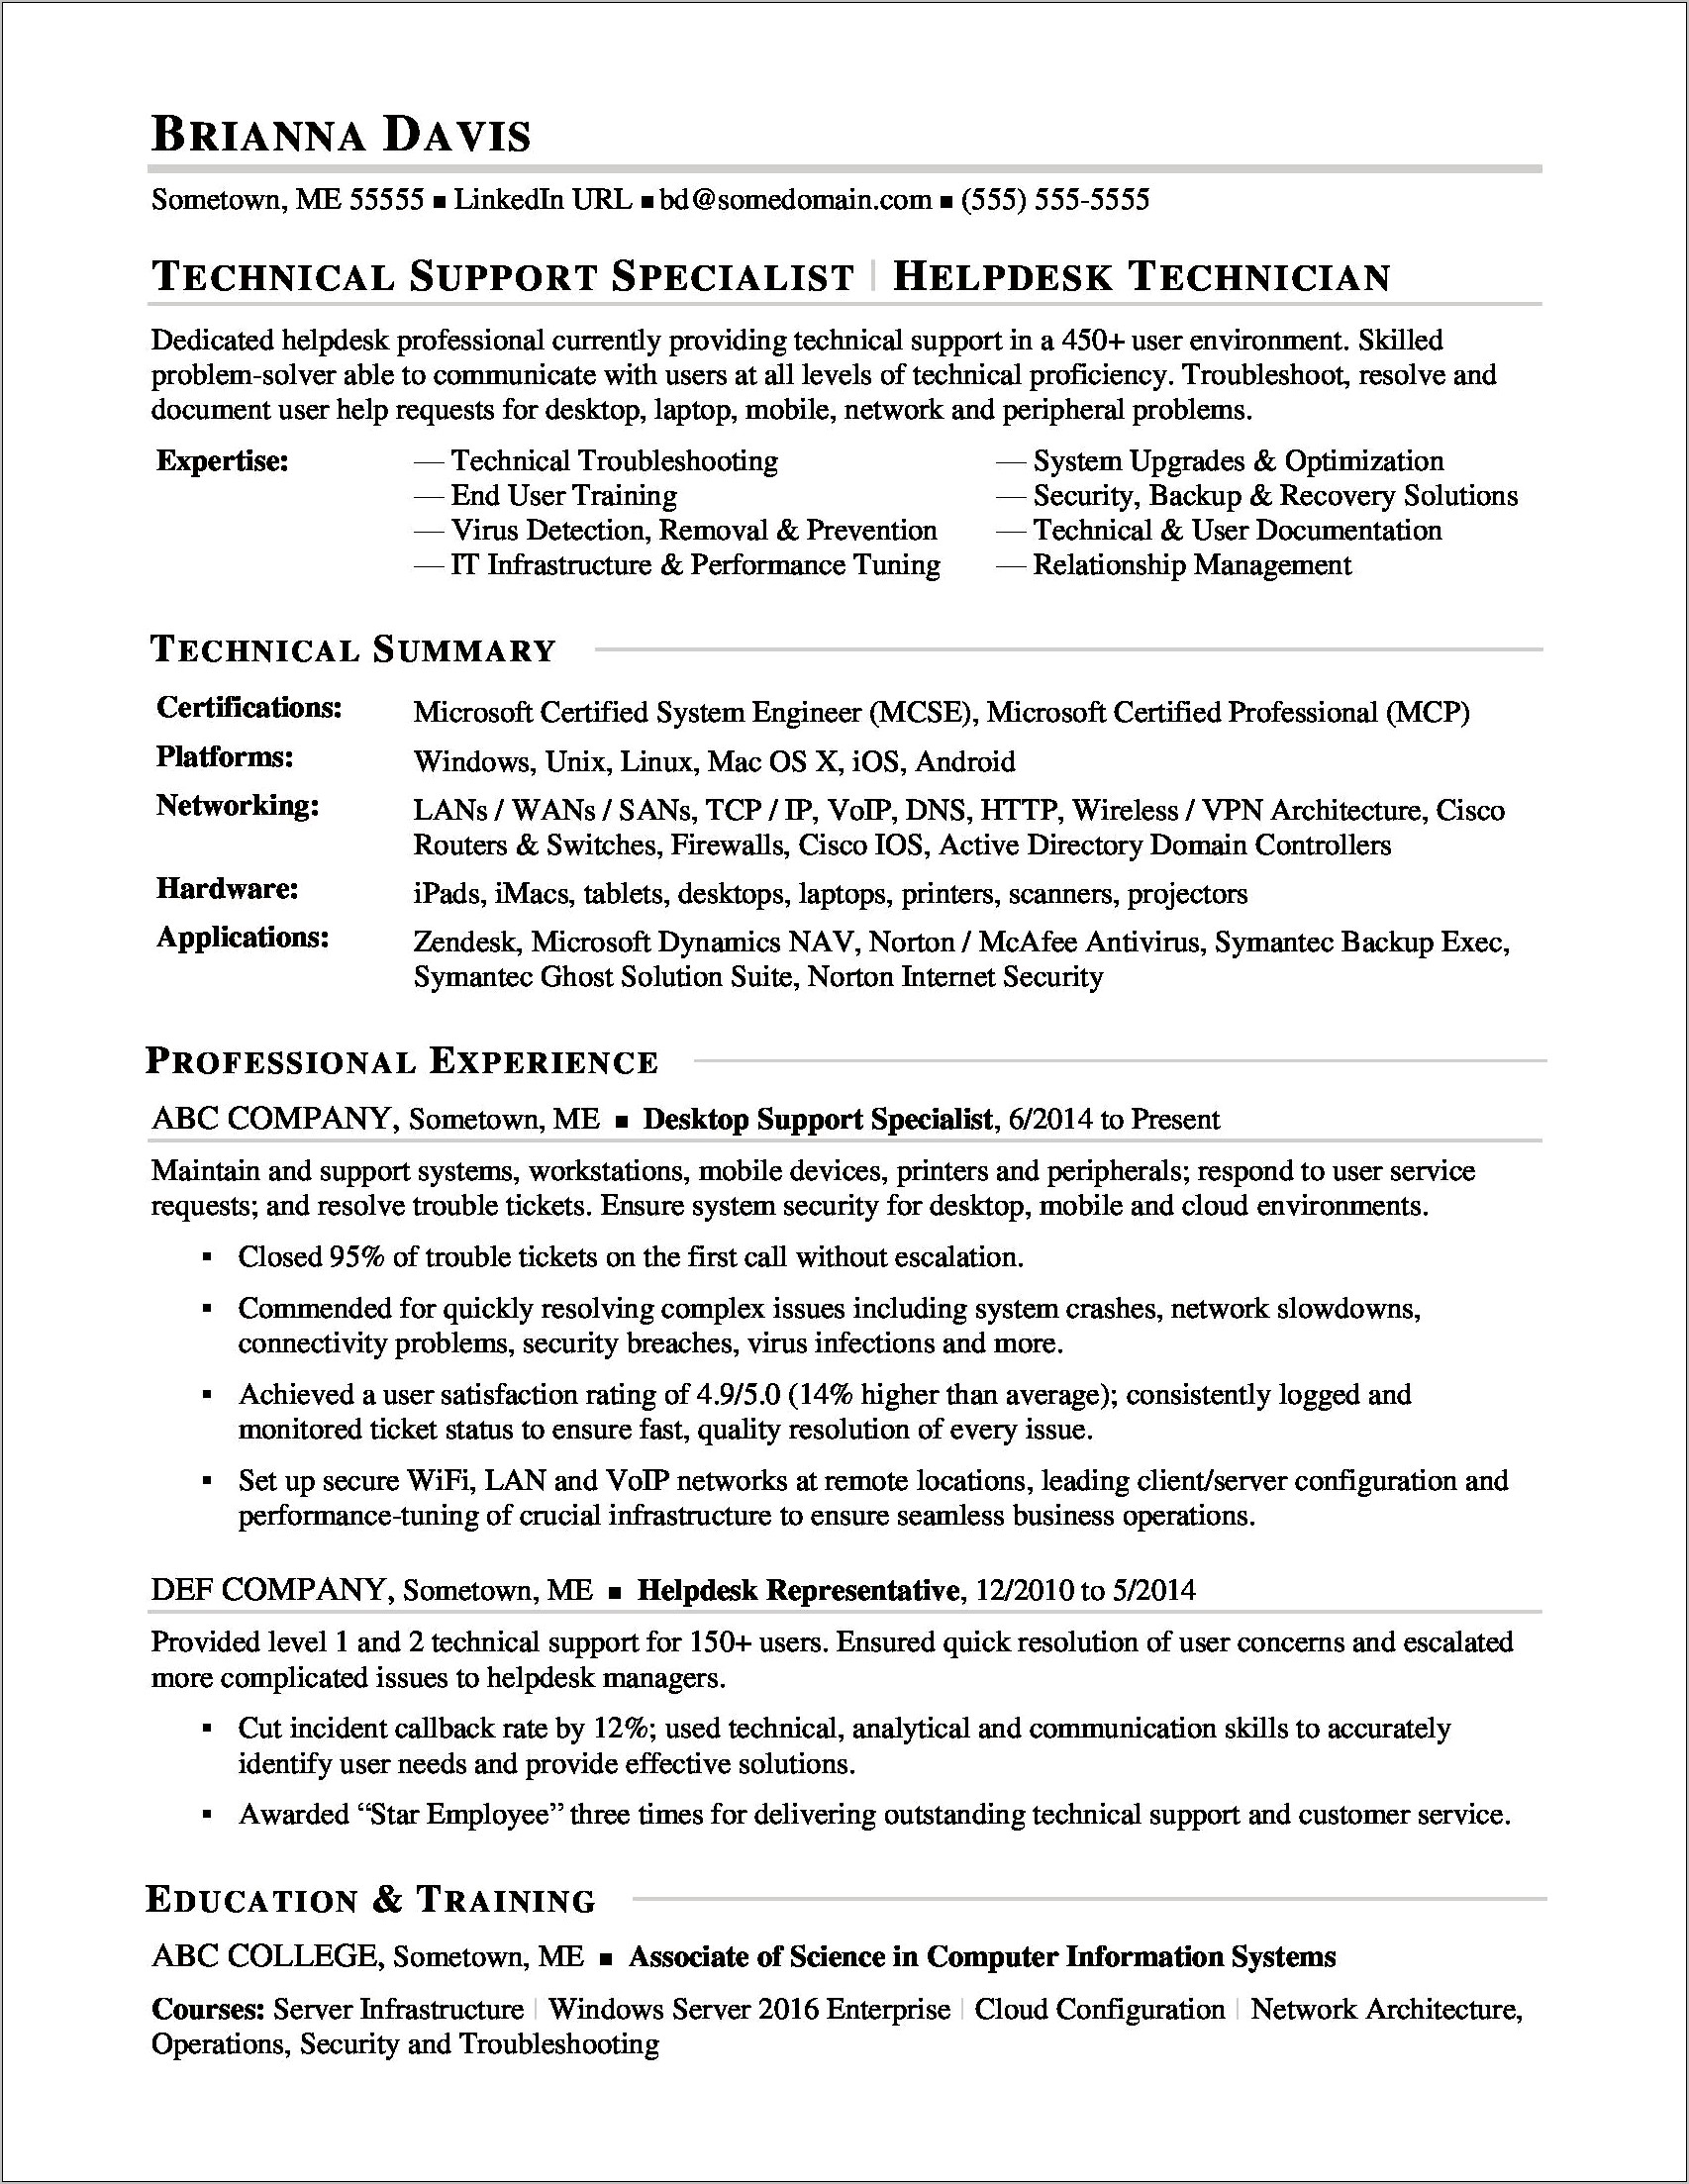 Sample Resume Of Application Support Analyst